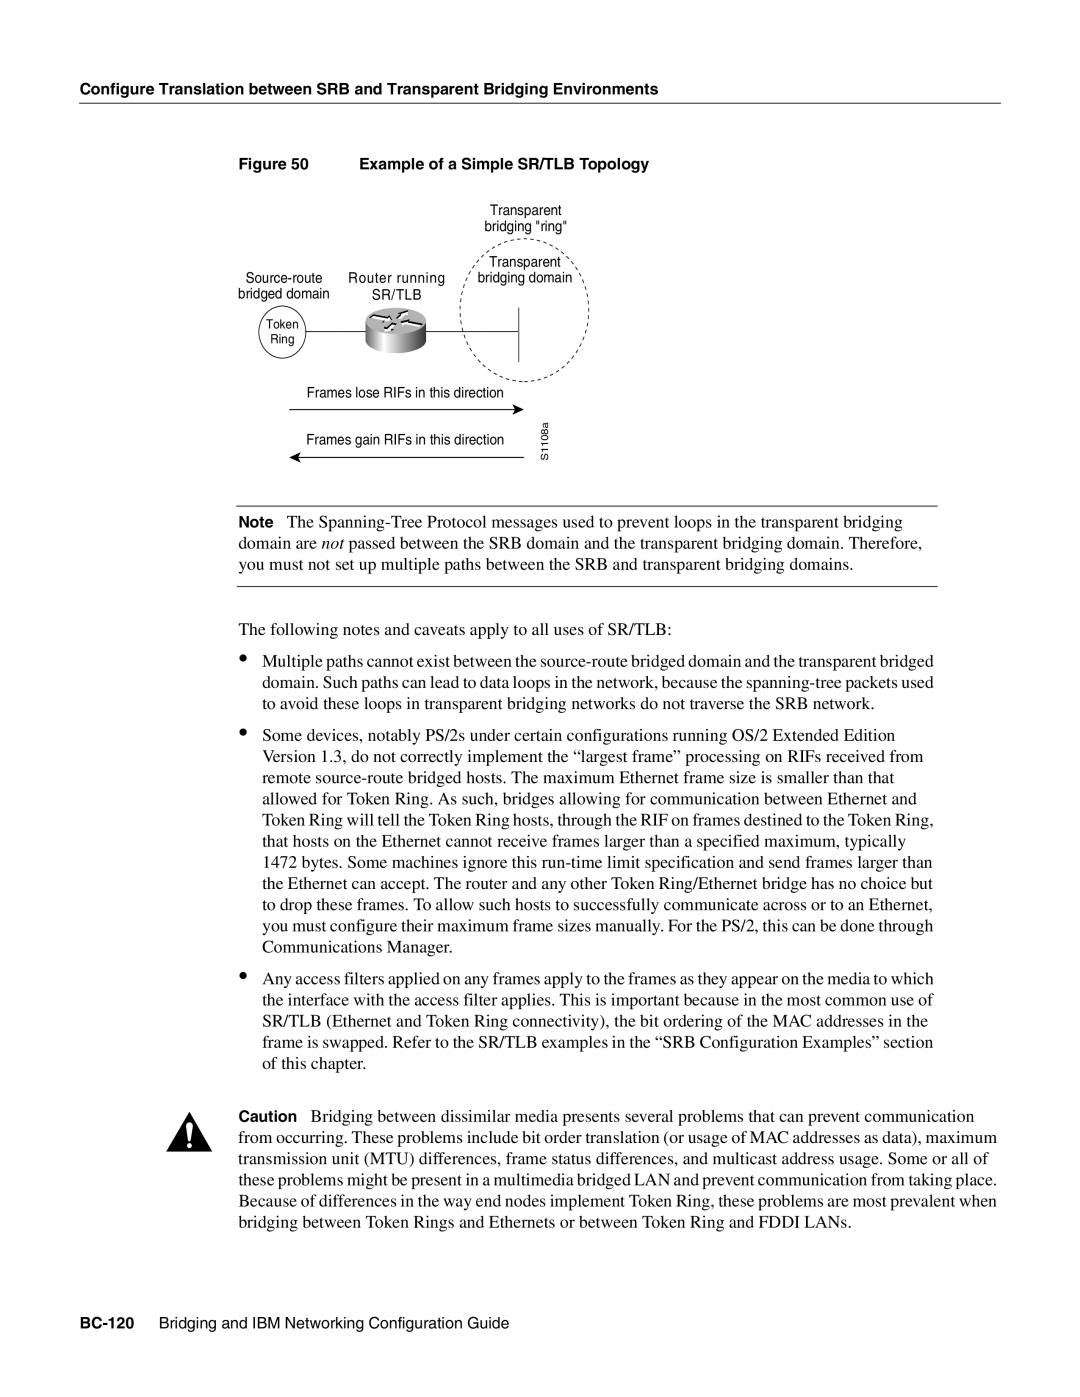 Cisco Systems BC-109 manual The following notes and caveats apply to all uses of SR/TLB 